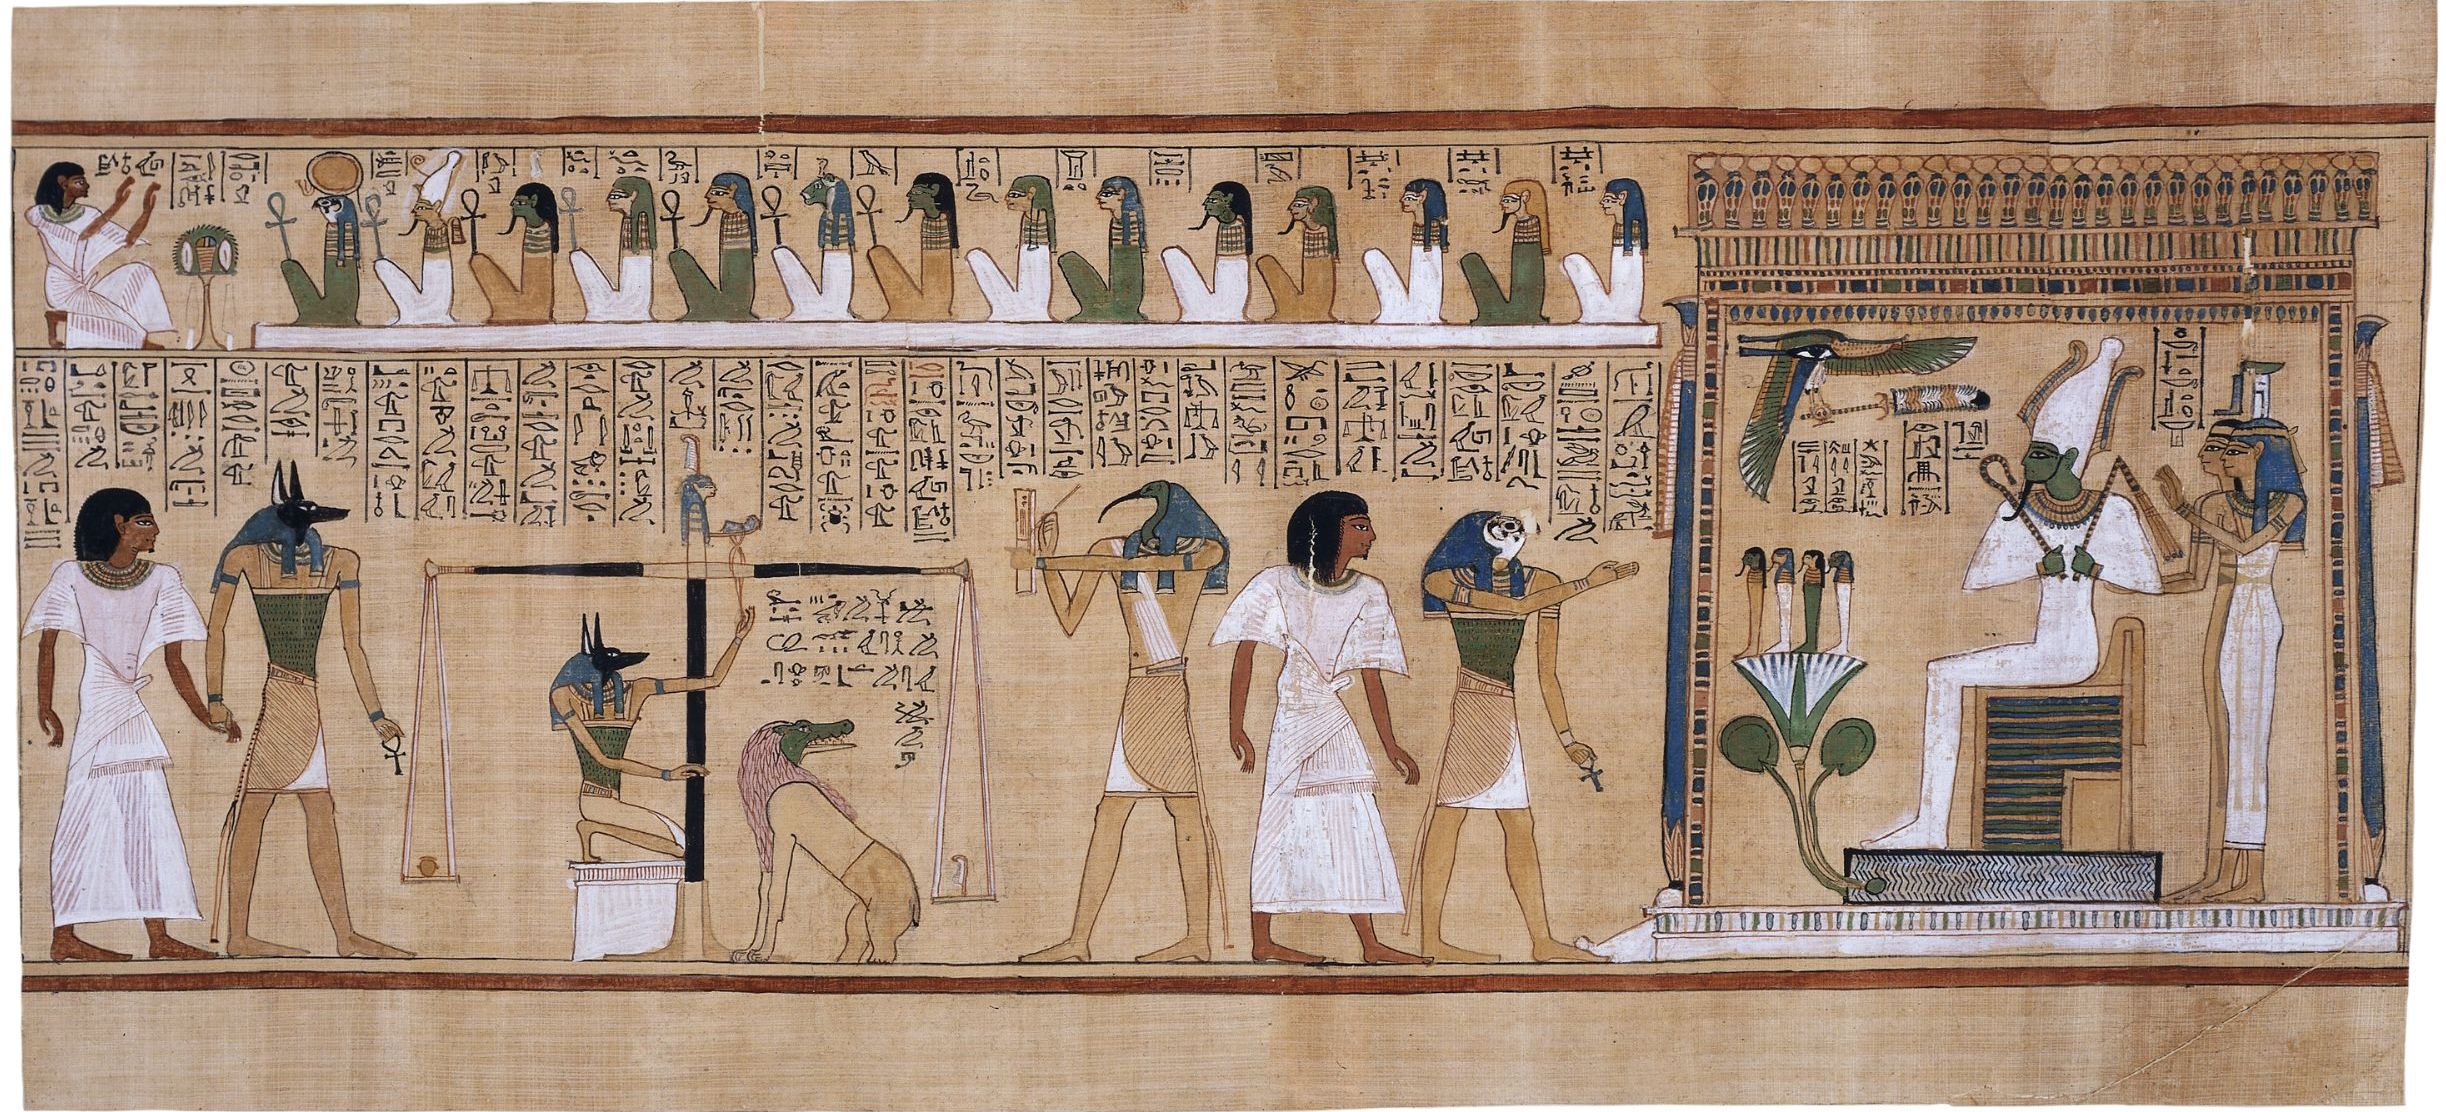 Judgement scene from the Book of the Dead